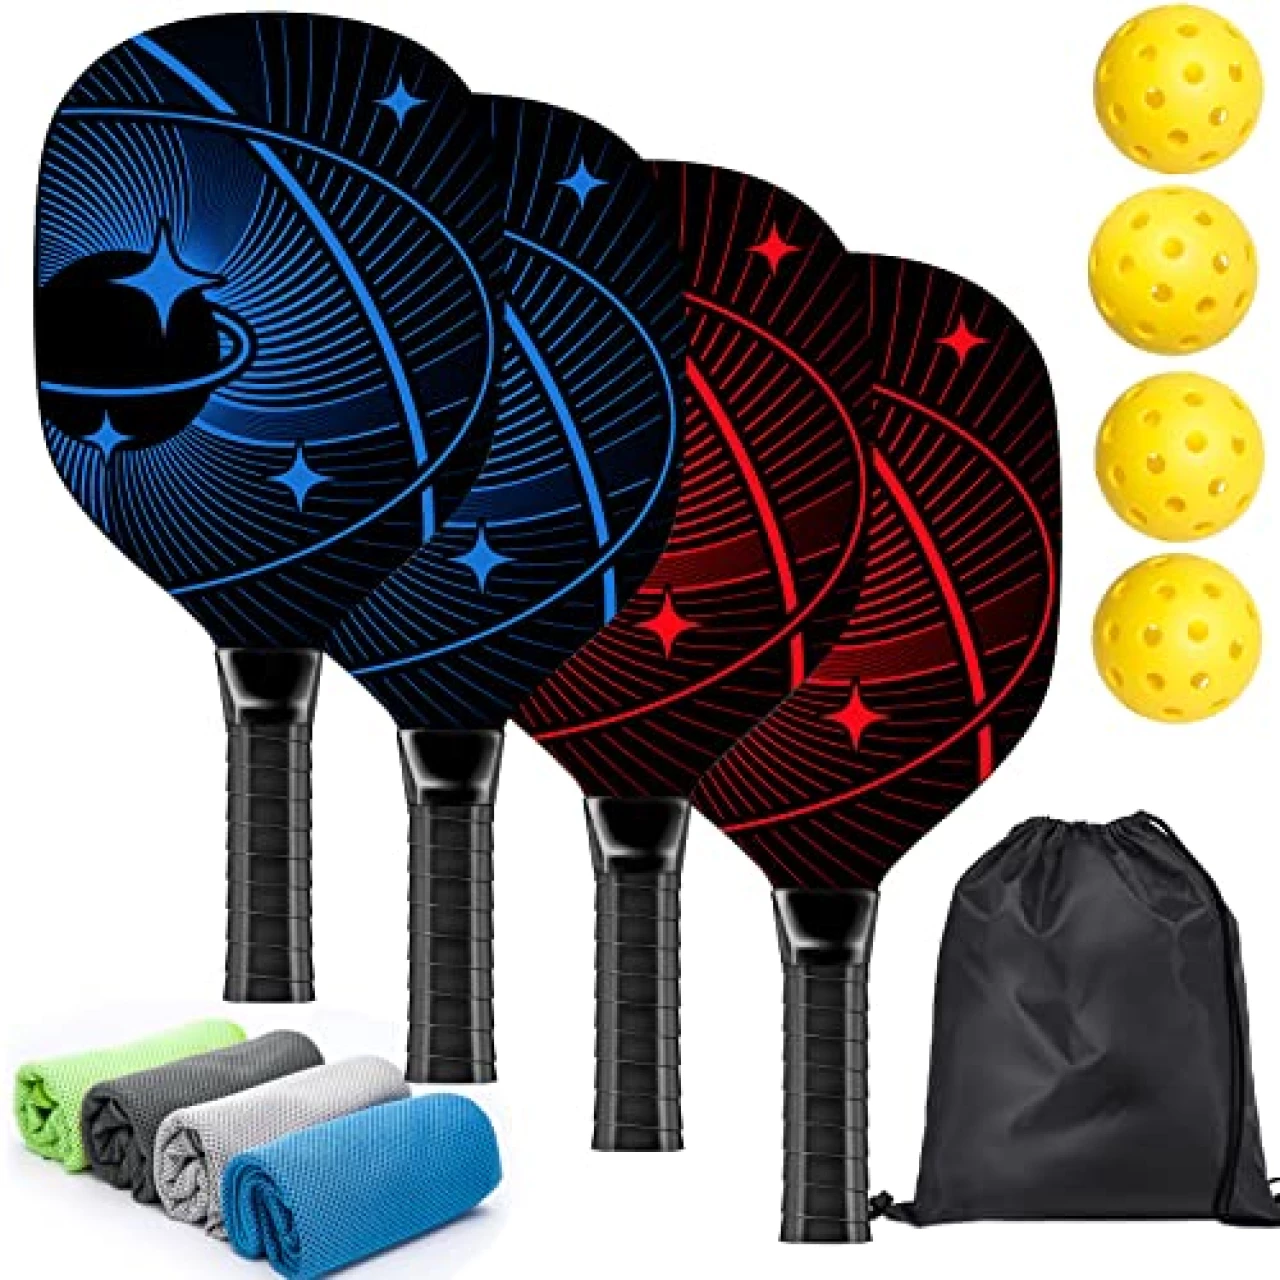 Pickleball Set with 4 Premium Wood Pickleball Paddles, 4 Pickleball Balls, 4 Cooling Towels &amp; Carry Bag, Pickleball Rackets with Ergonomic Cushion Grip, Gifts for Men Women